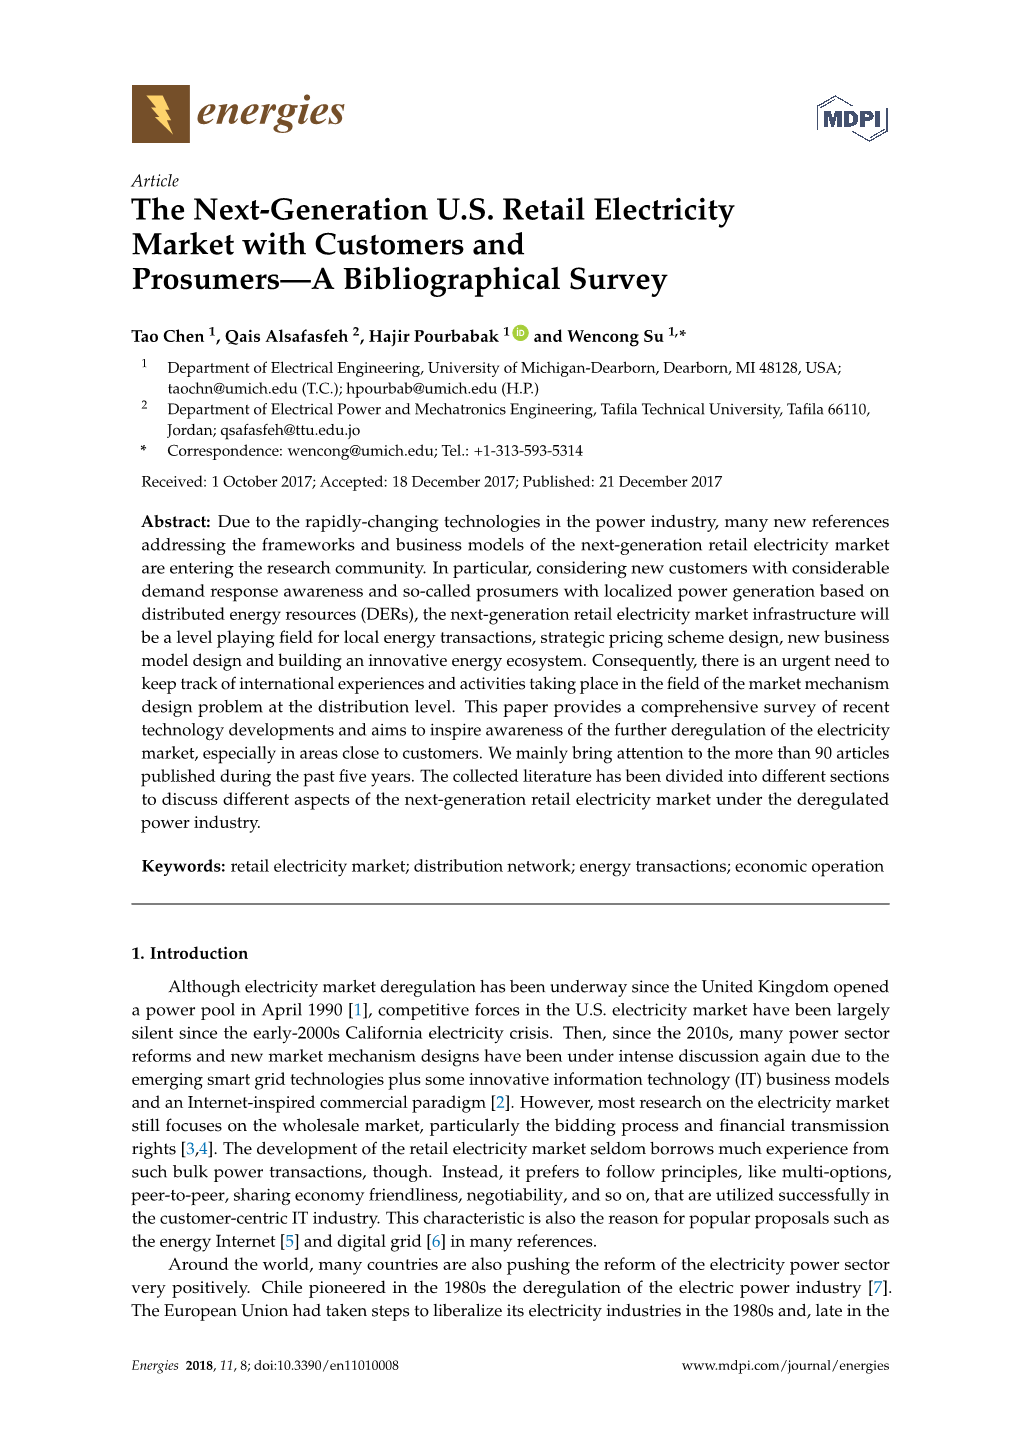 The Next-Generation U.S. Retail Electricity Market with Customers and Prosumers—A Bibliographical Survey